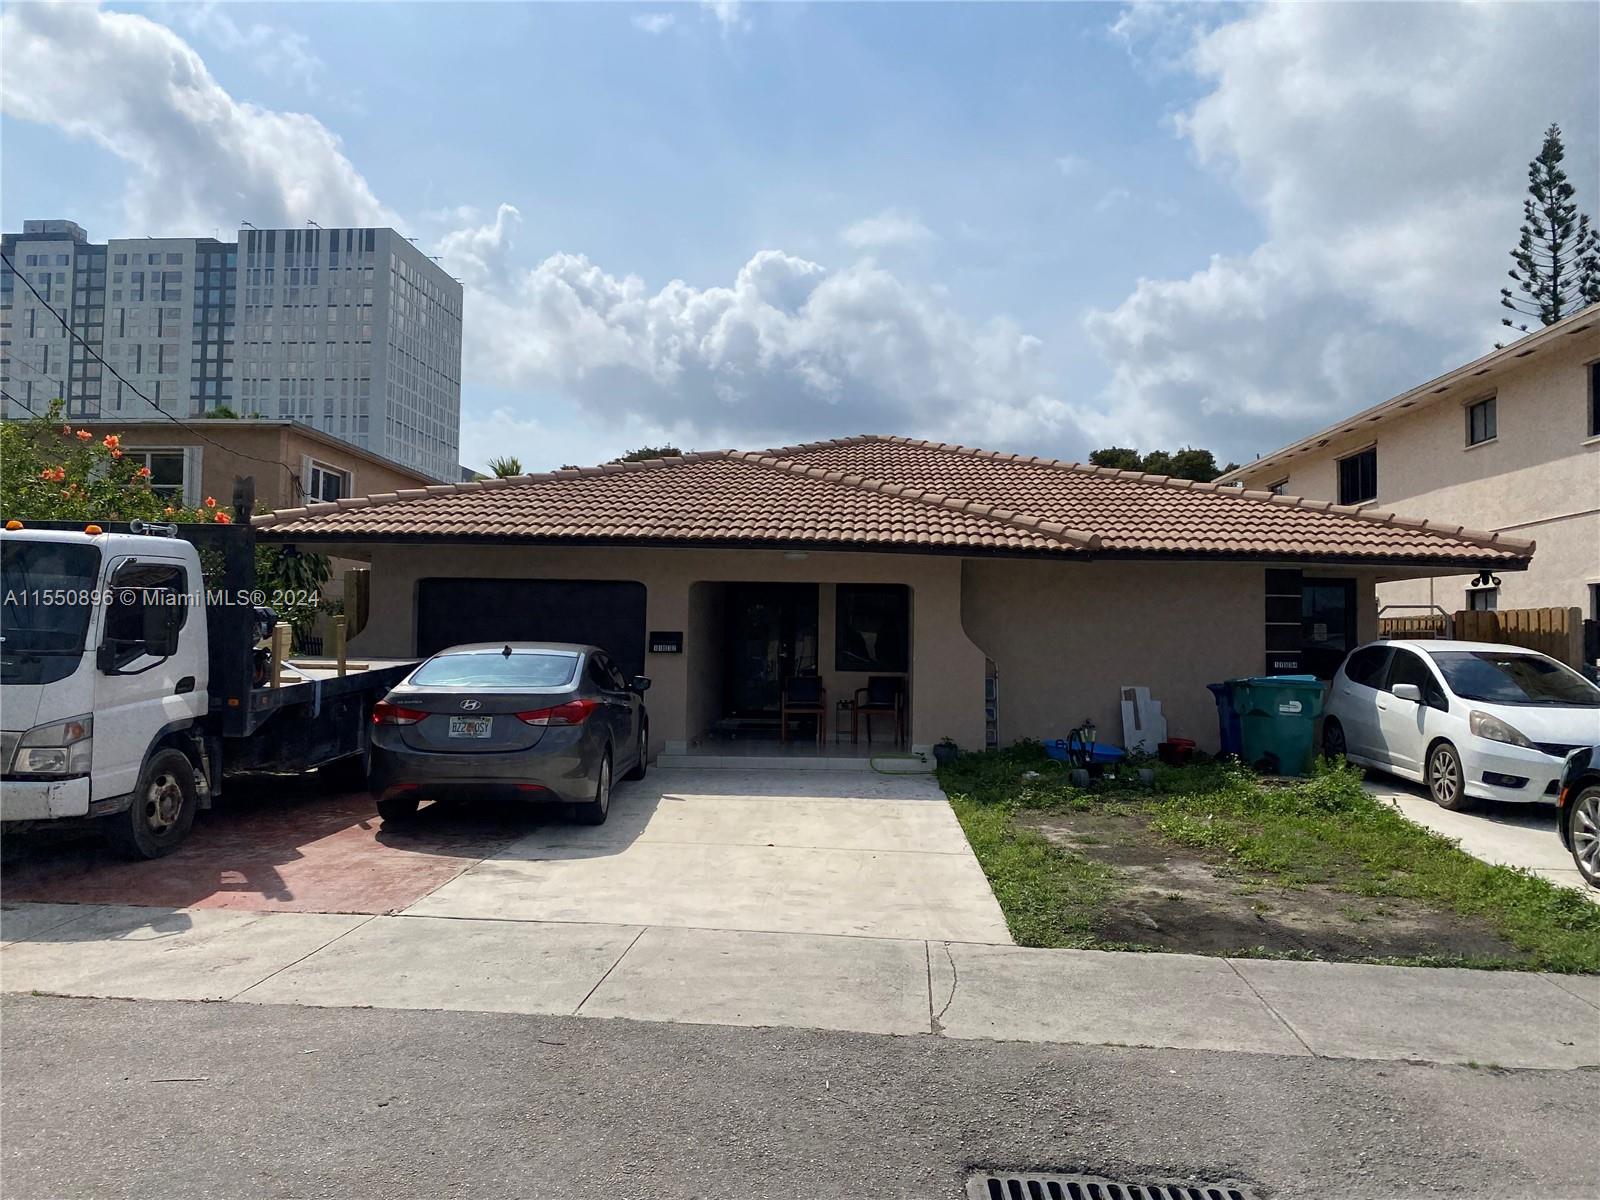 Rental Property at 11032 Sw 5th St, Sweetwater, Miami-Dade County, Florida -  - $849,999 MO.